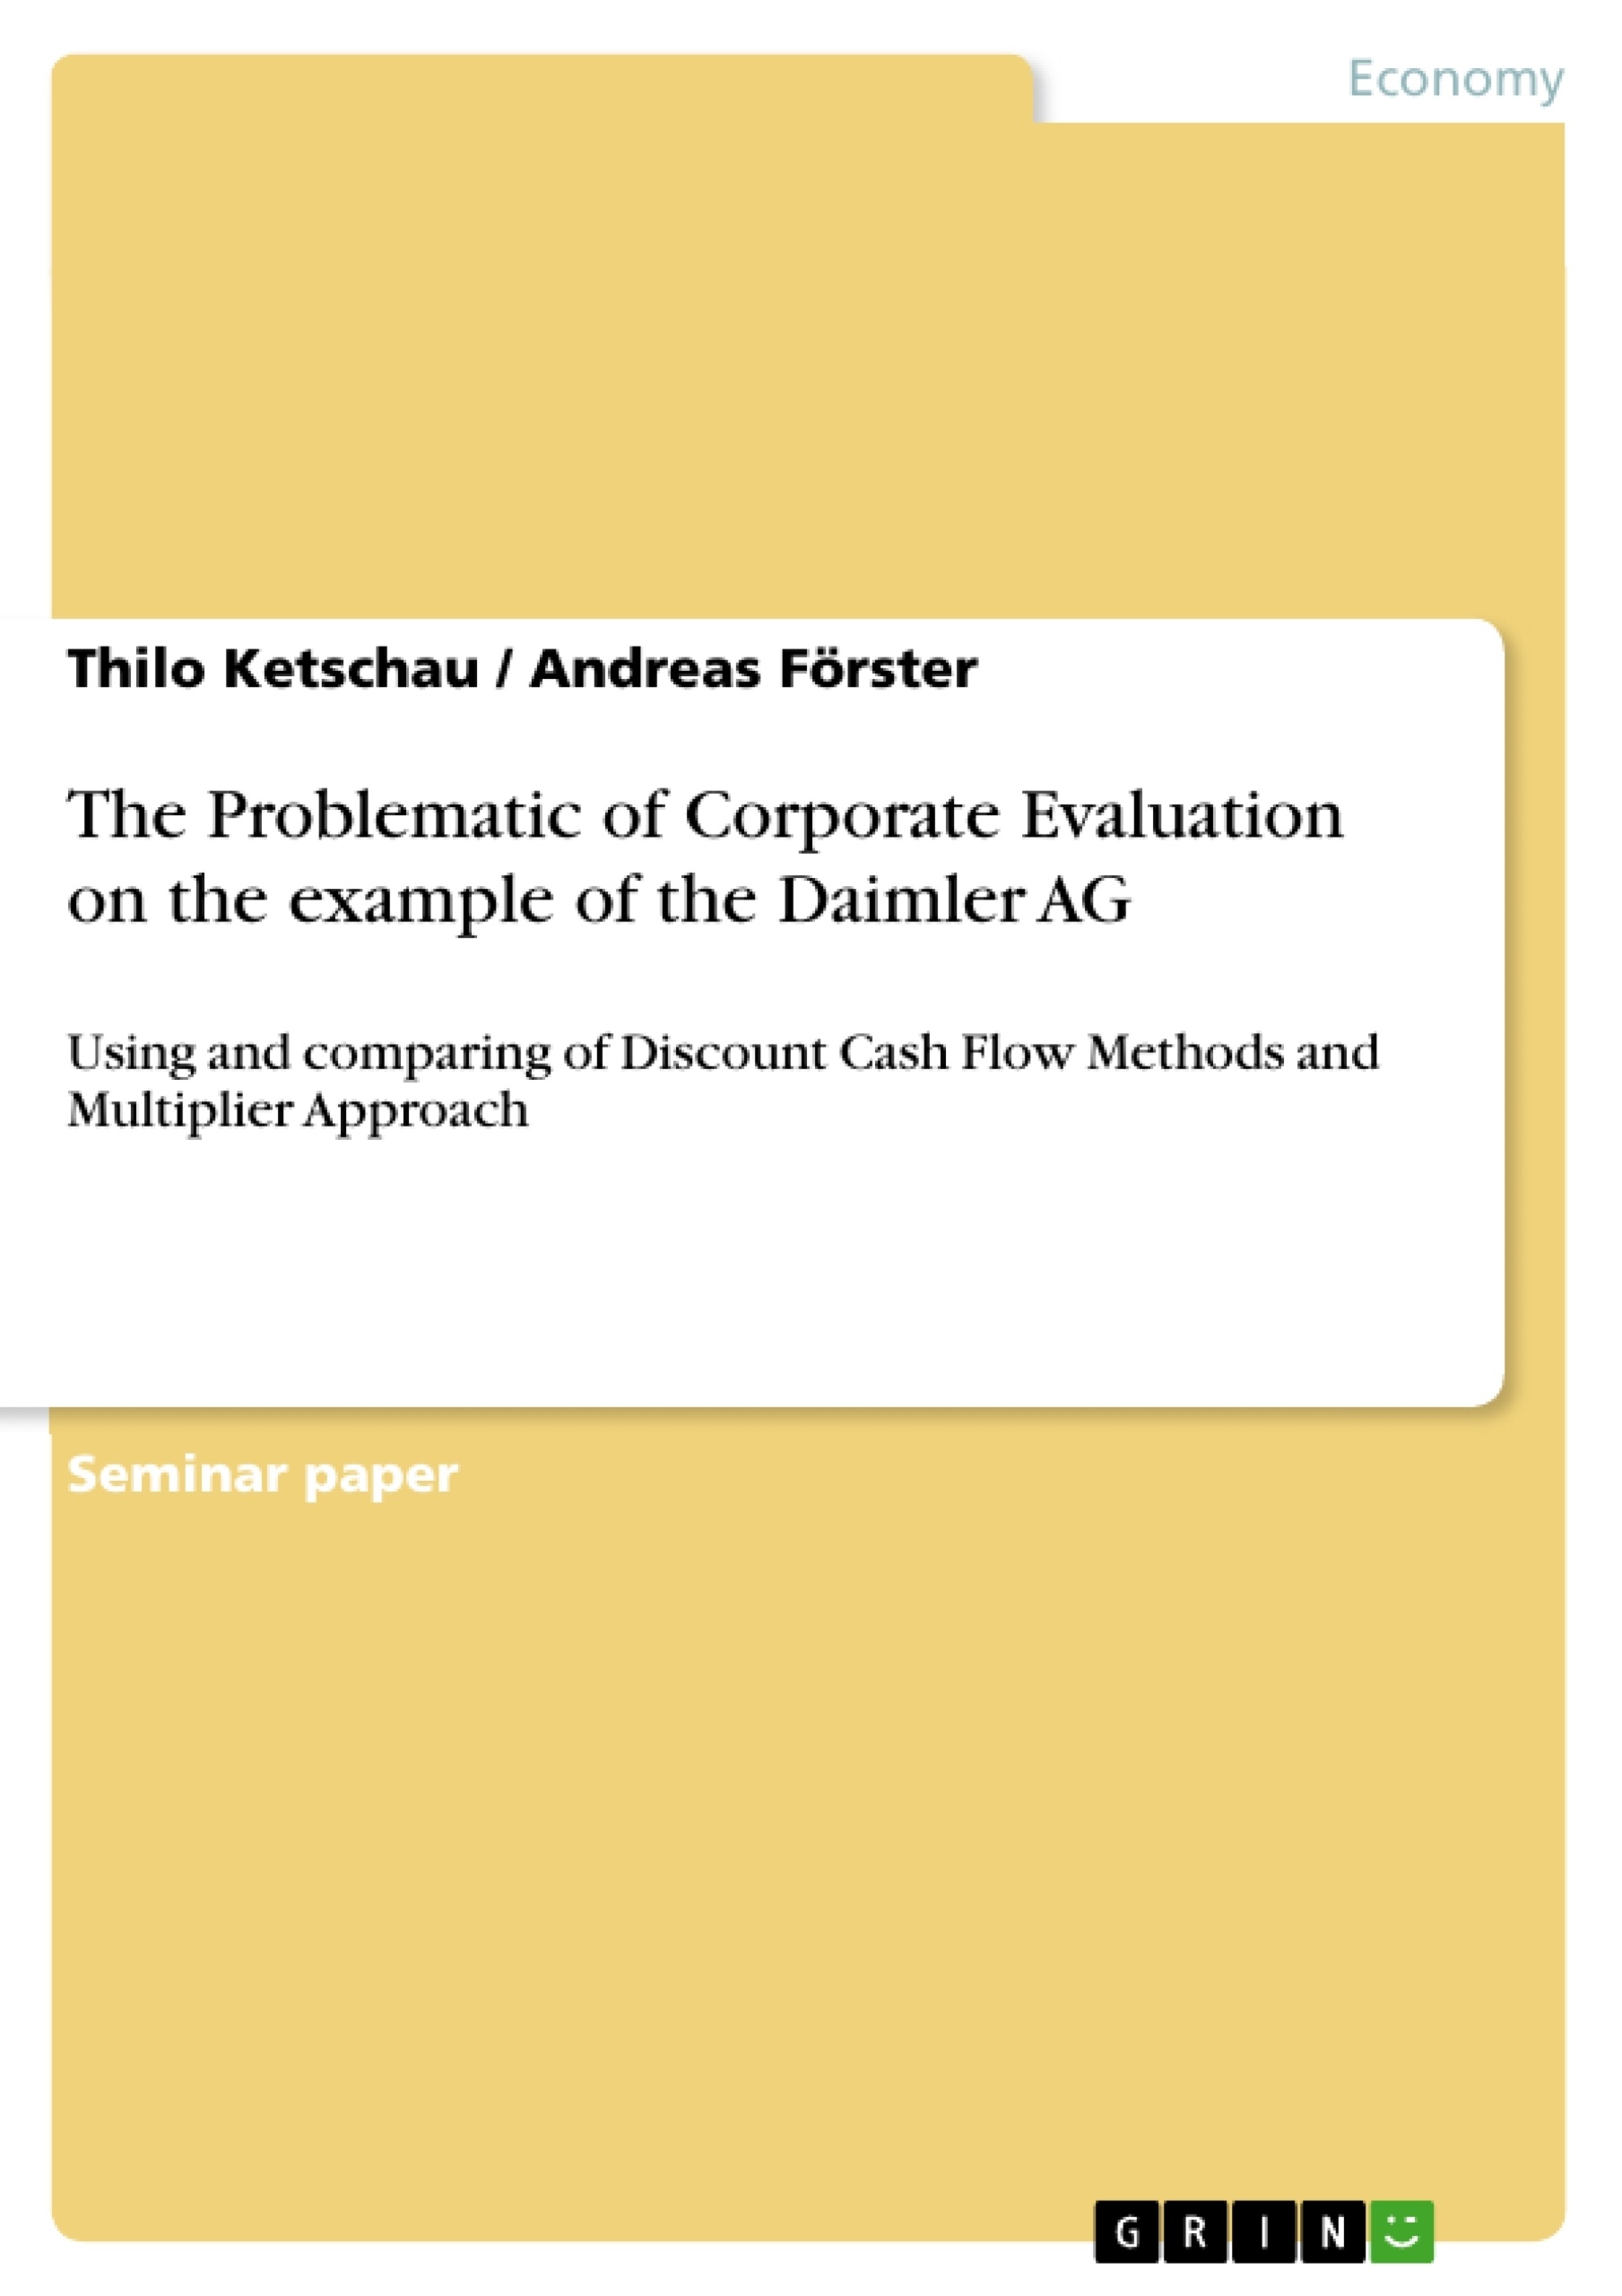 Titel: The Problematic of Corporate Evaluation on the example of the Daimler AG